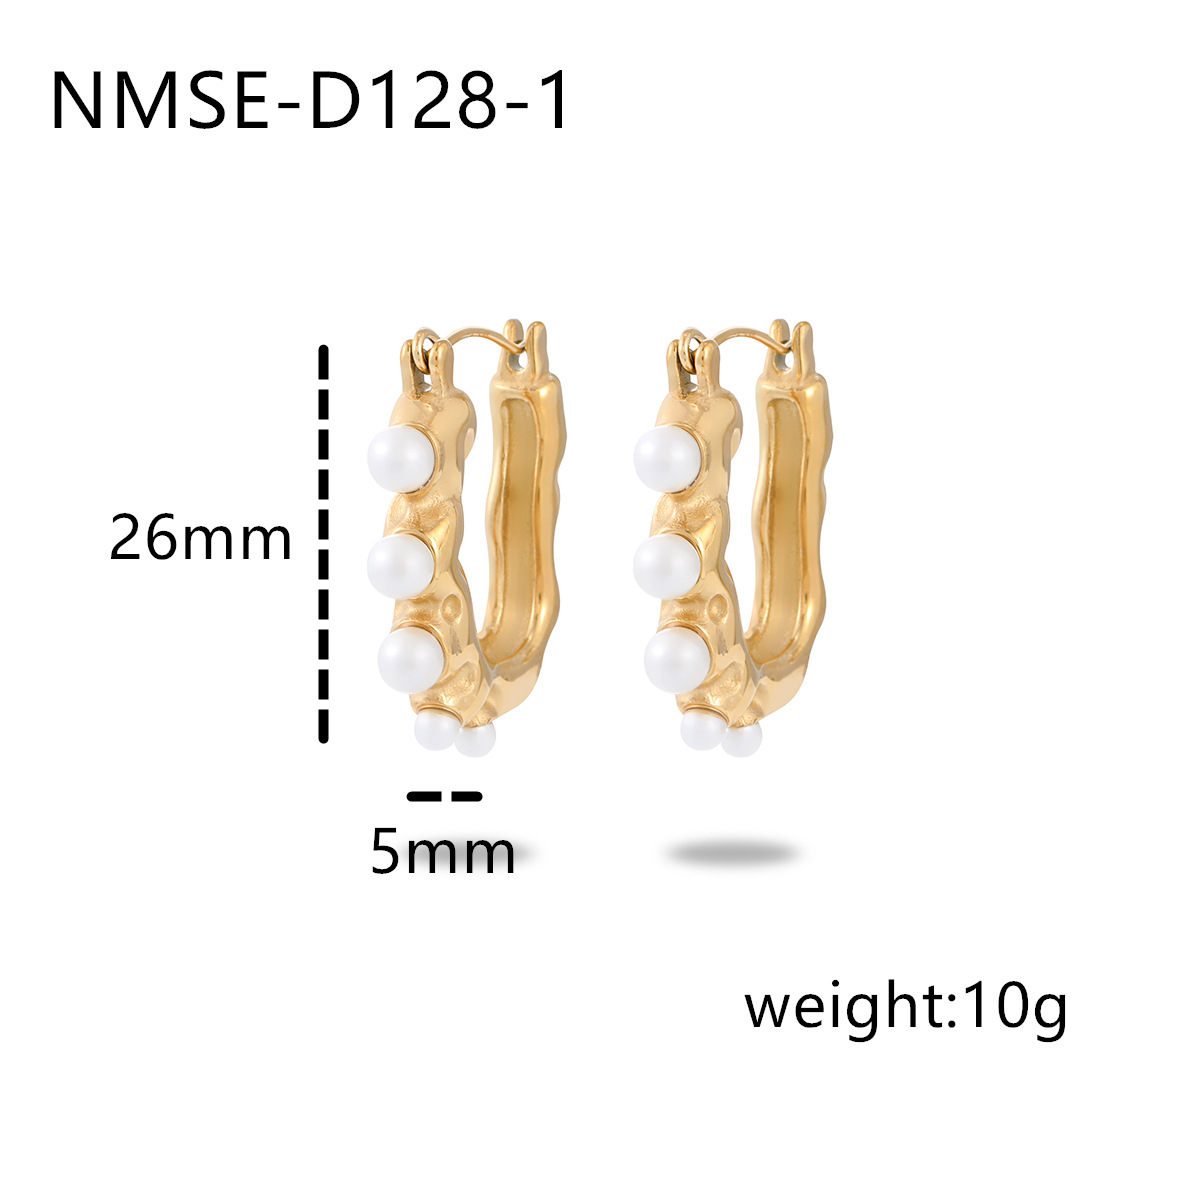 4:NMSE-D128-1